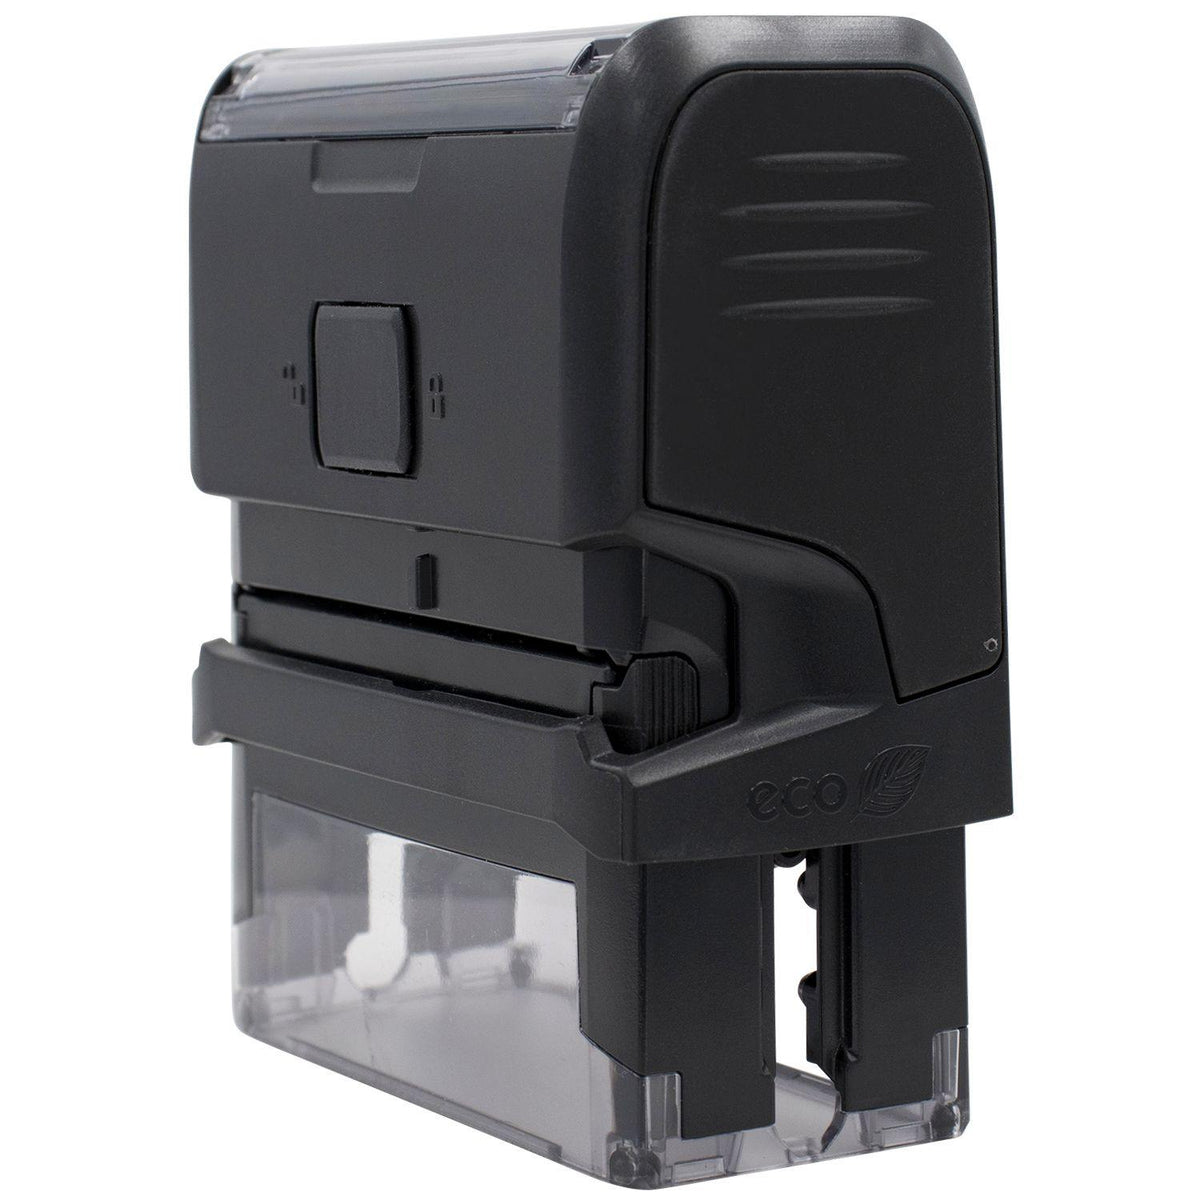 Large Self Inking Second Notice Stamp - Engineer Seal Stamps - Brand_Trodat, Impression Size_Large, Stamp Type_Self-Inking Stamp, Type of Use_Business, Type of Use_Finance